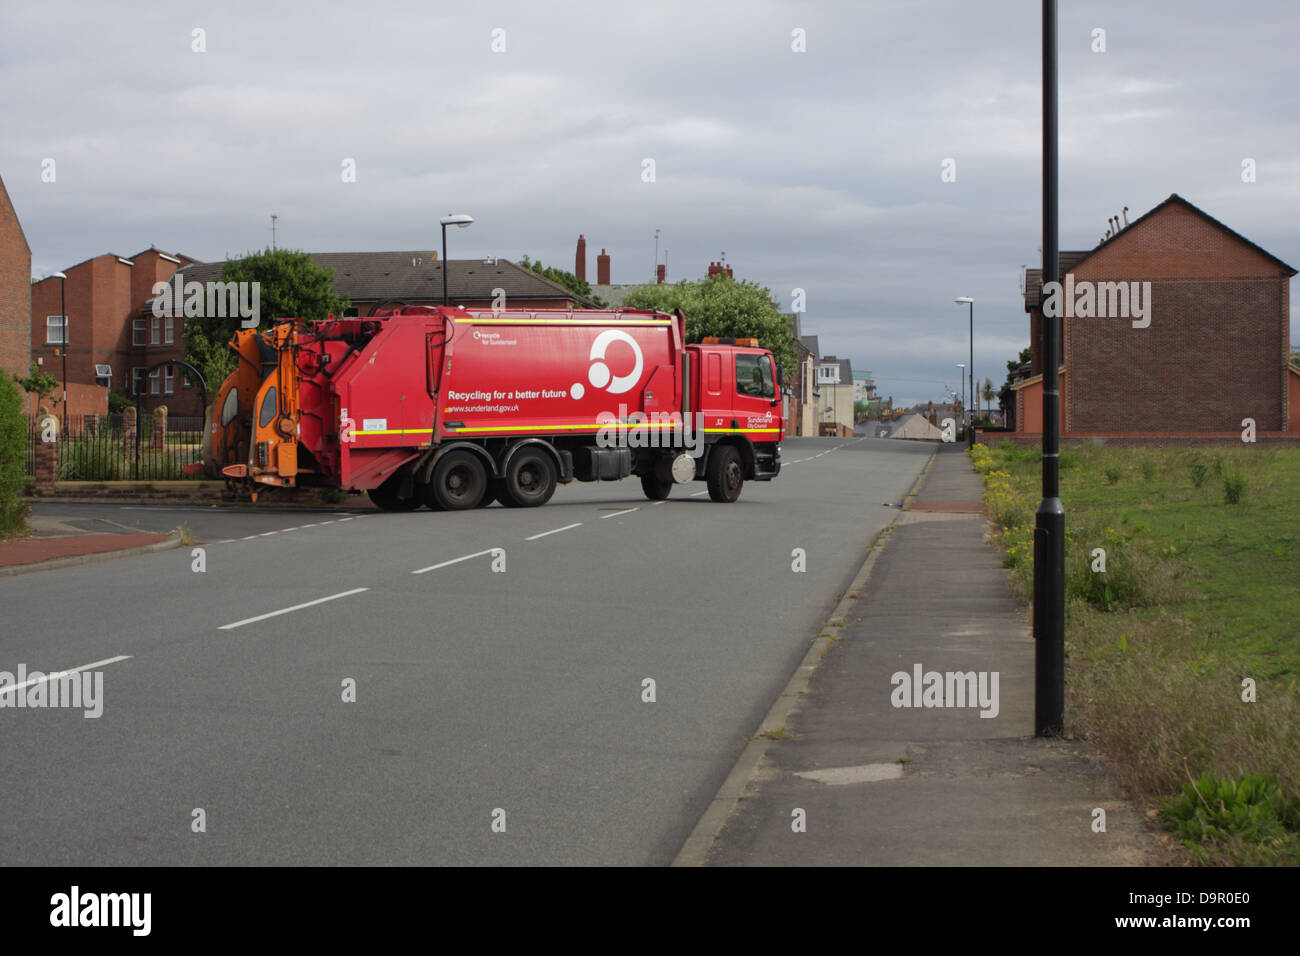 bin lorry / refuse collection, garbage truck. Stock Photo